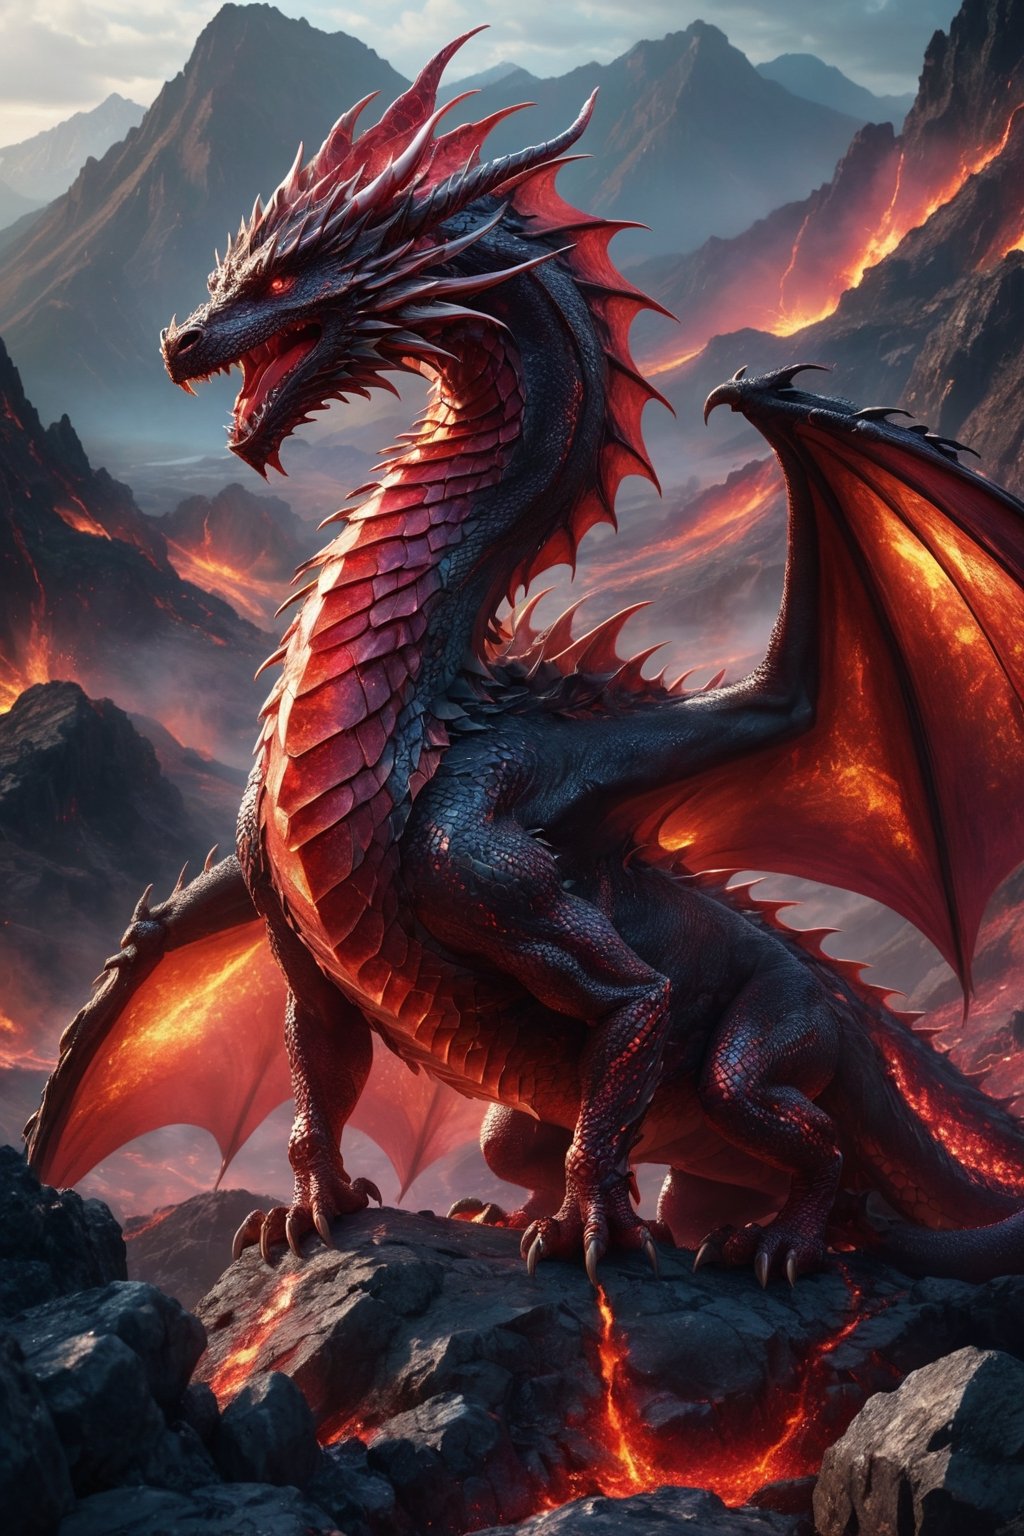 Generate hyper realistic image of a dragon with ruby shimmering skin that reflects light in mesmerizing patterns, giving an ethereal and otherworldly appearance, volcanic landscape,